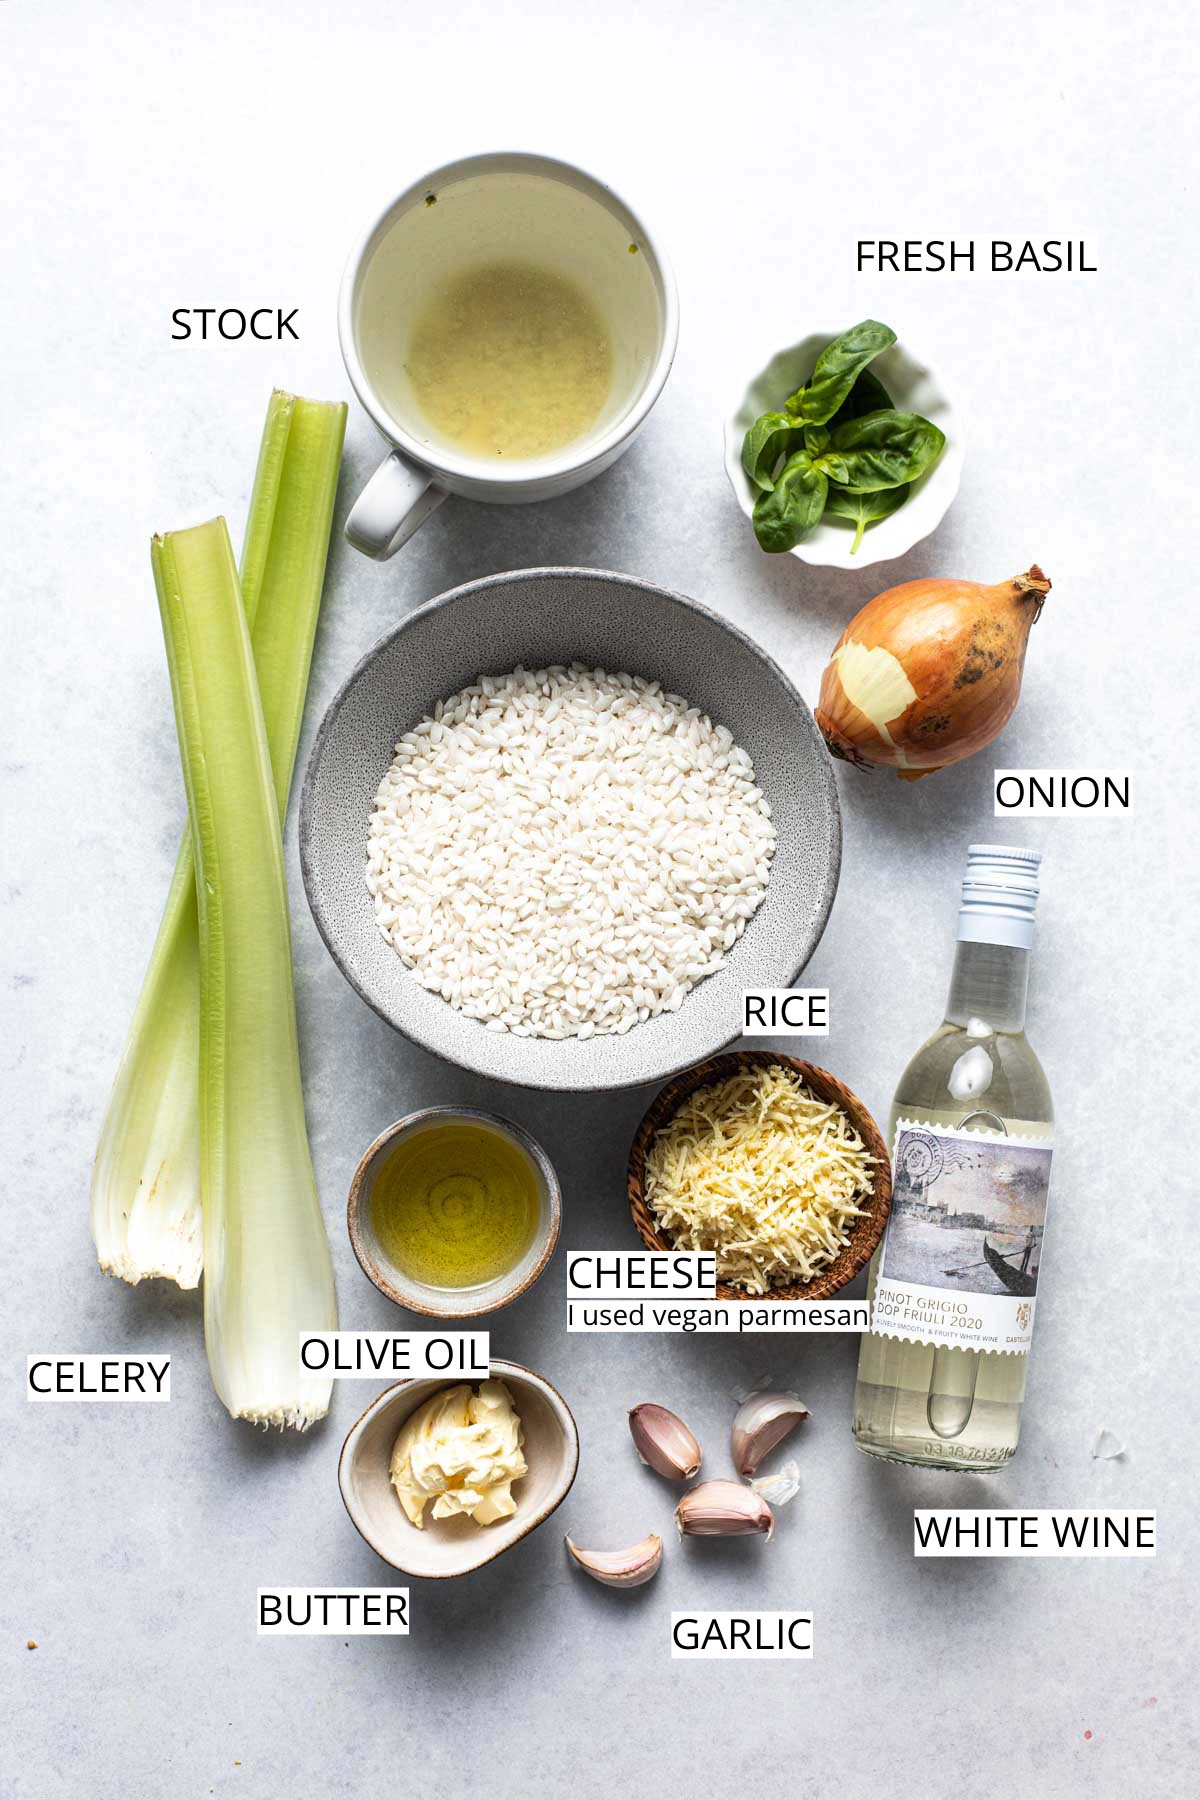 All ingredients needed to make risotto laid out in bowls on a flat grey surface.